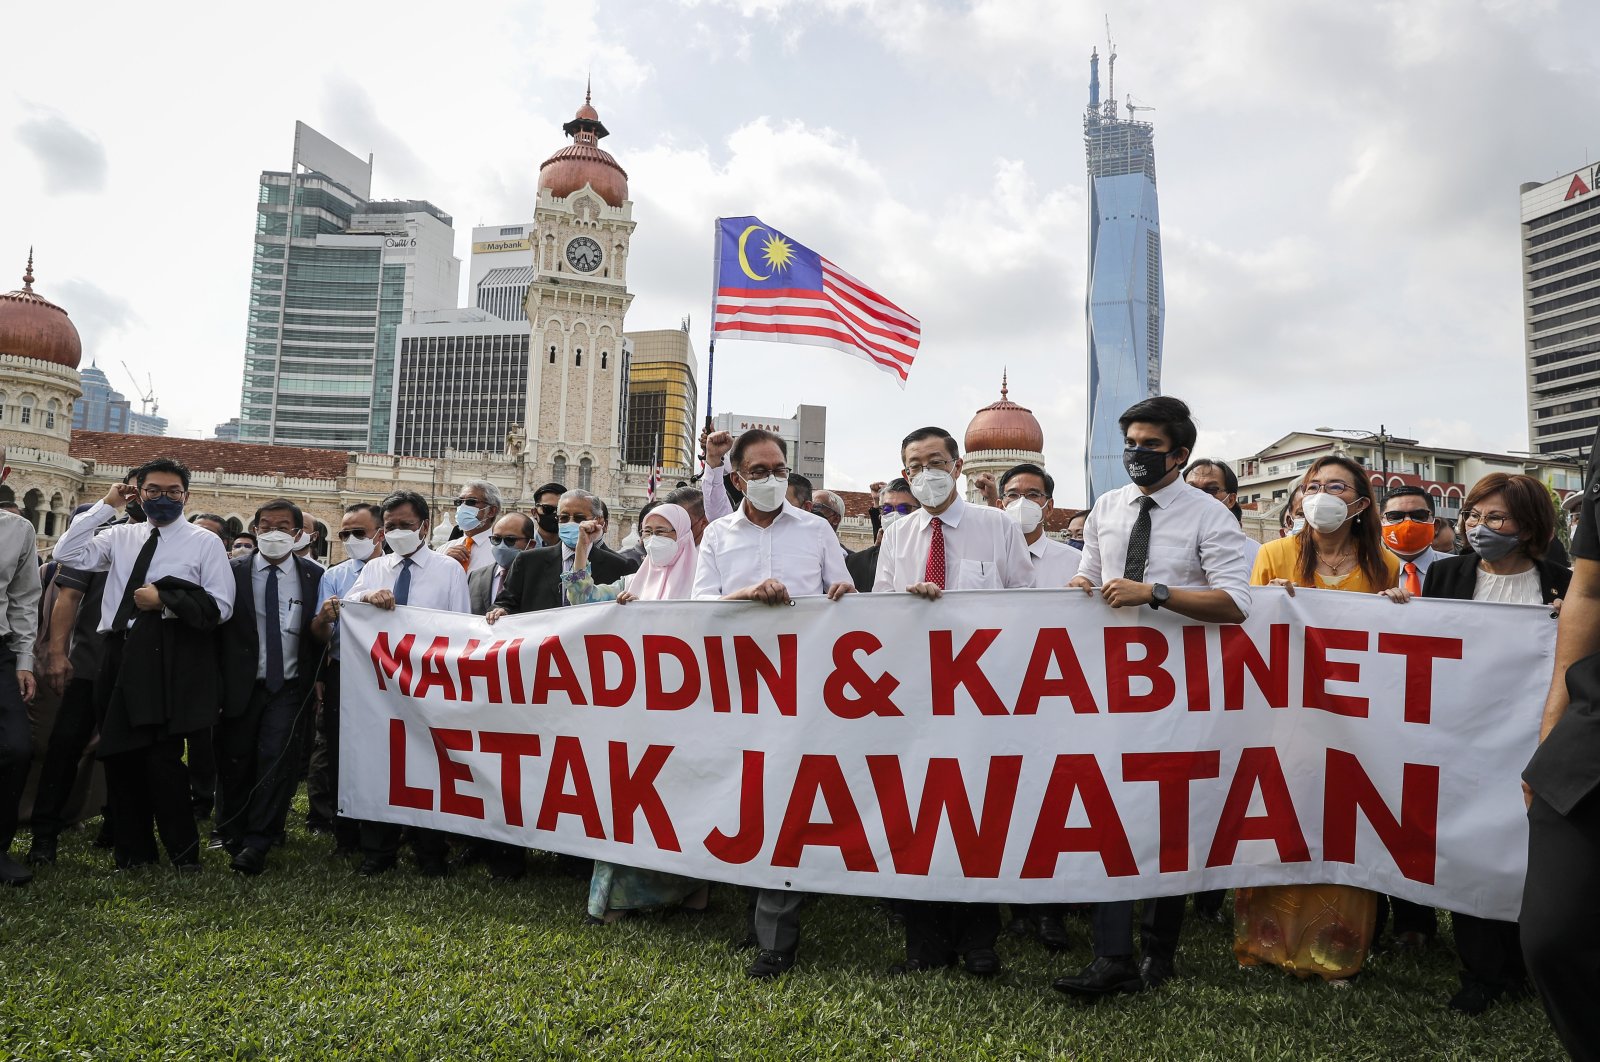 Malaysian opposition members Anwar Ibrahim, (4-L), and Mahathir Mohamad, (2-L), hold a banner reading "Muhyiddin and Cabinet resign" during a protest in Kuala Lumpur, Malaysia, Monday, Aug. 2, 2021. (AP Photo)